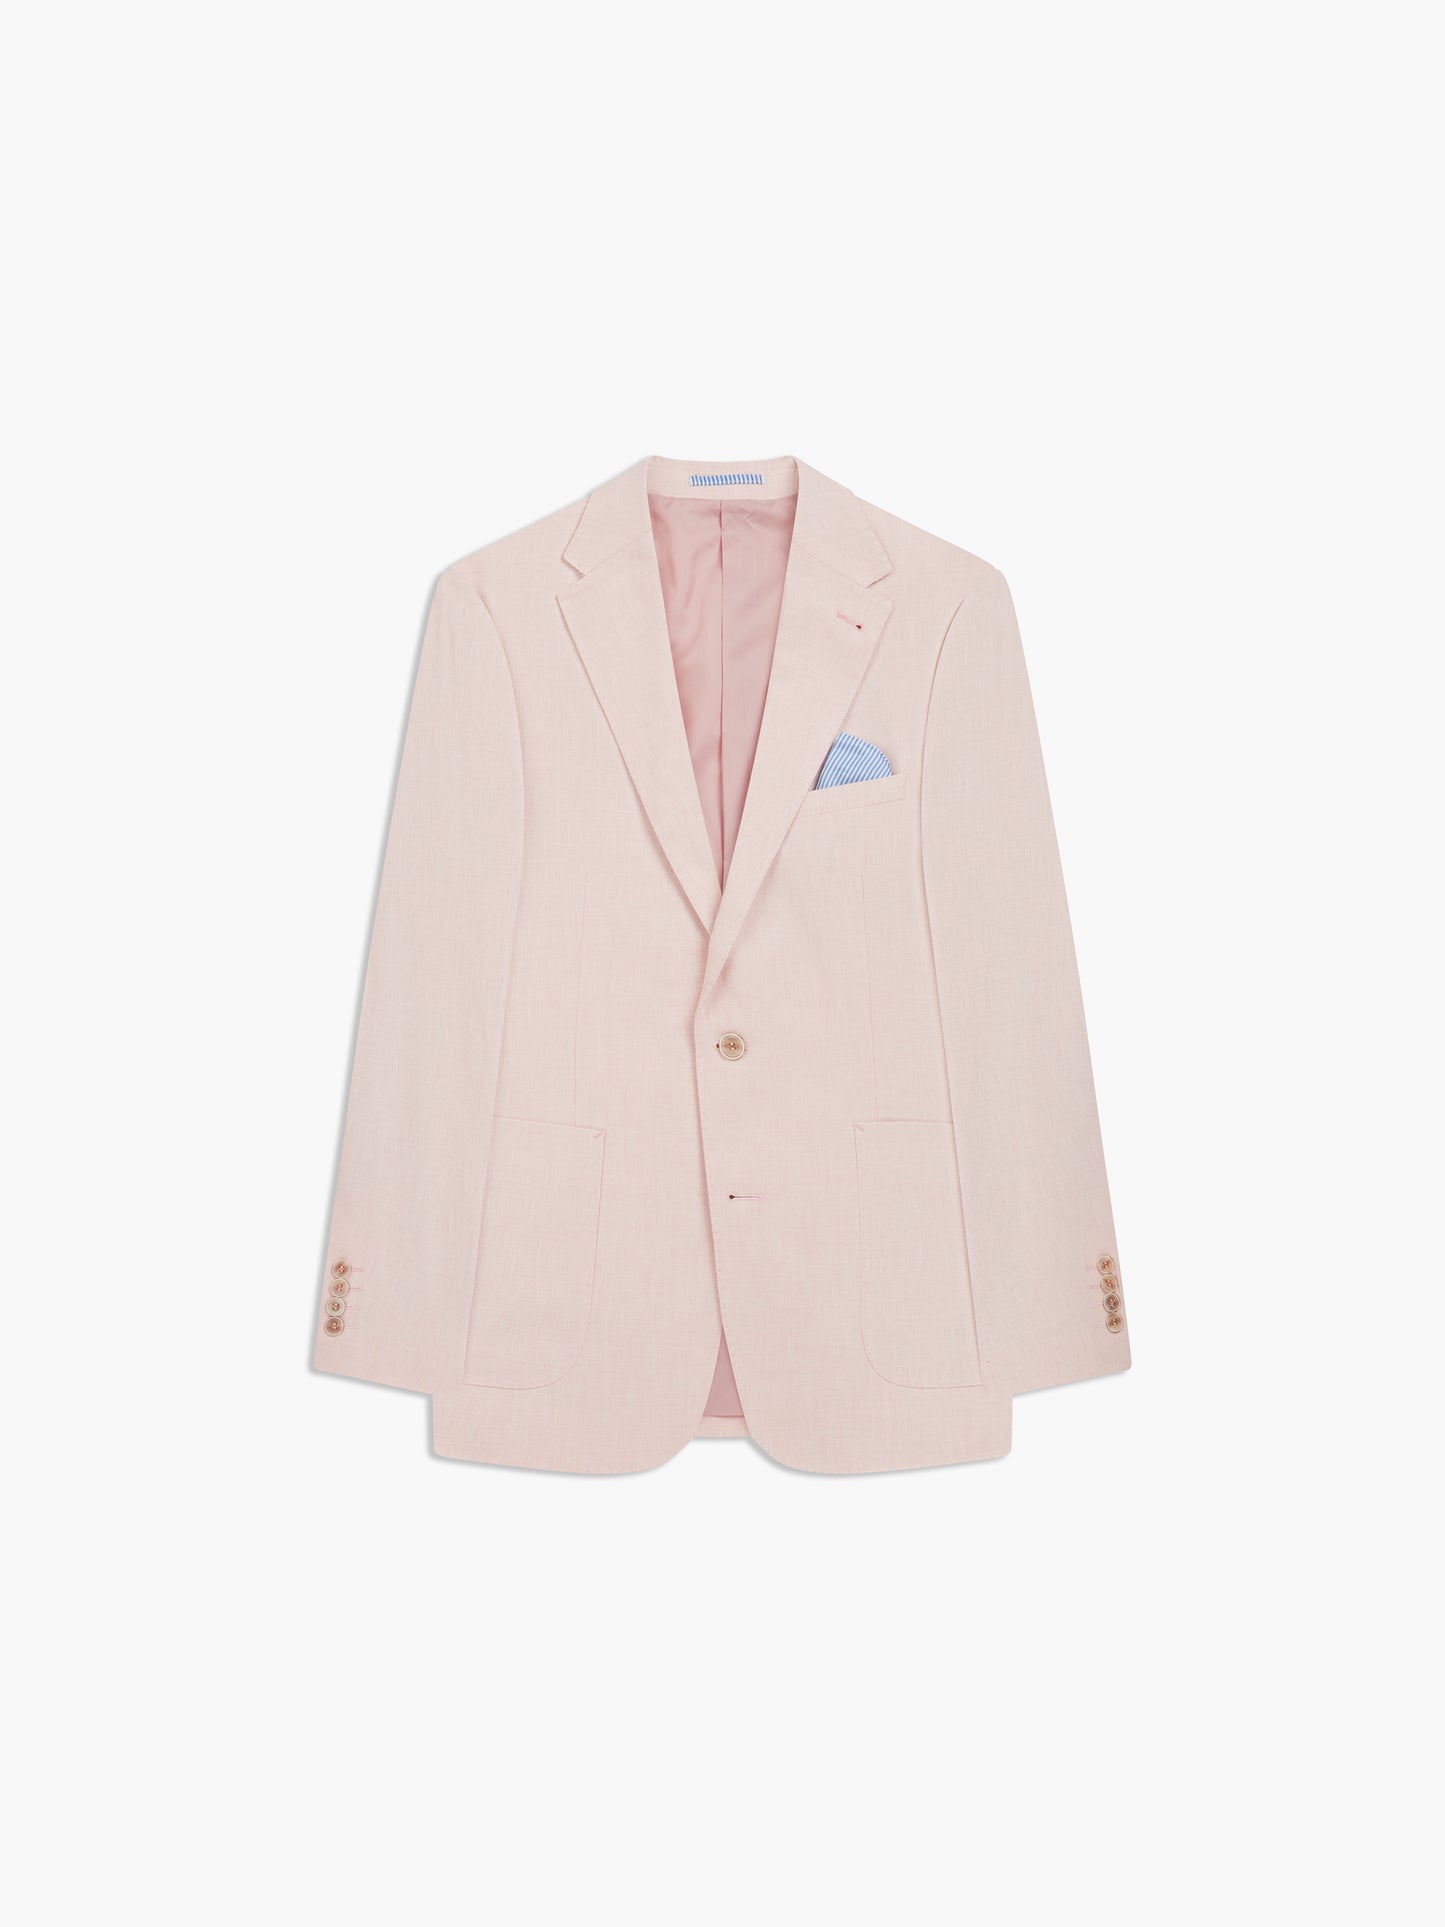 Image 8 of Slim Fit Single Breasted Linen Suit Jacket in Light Pink